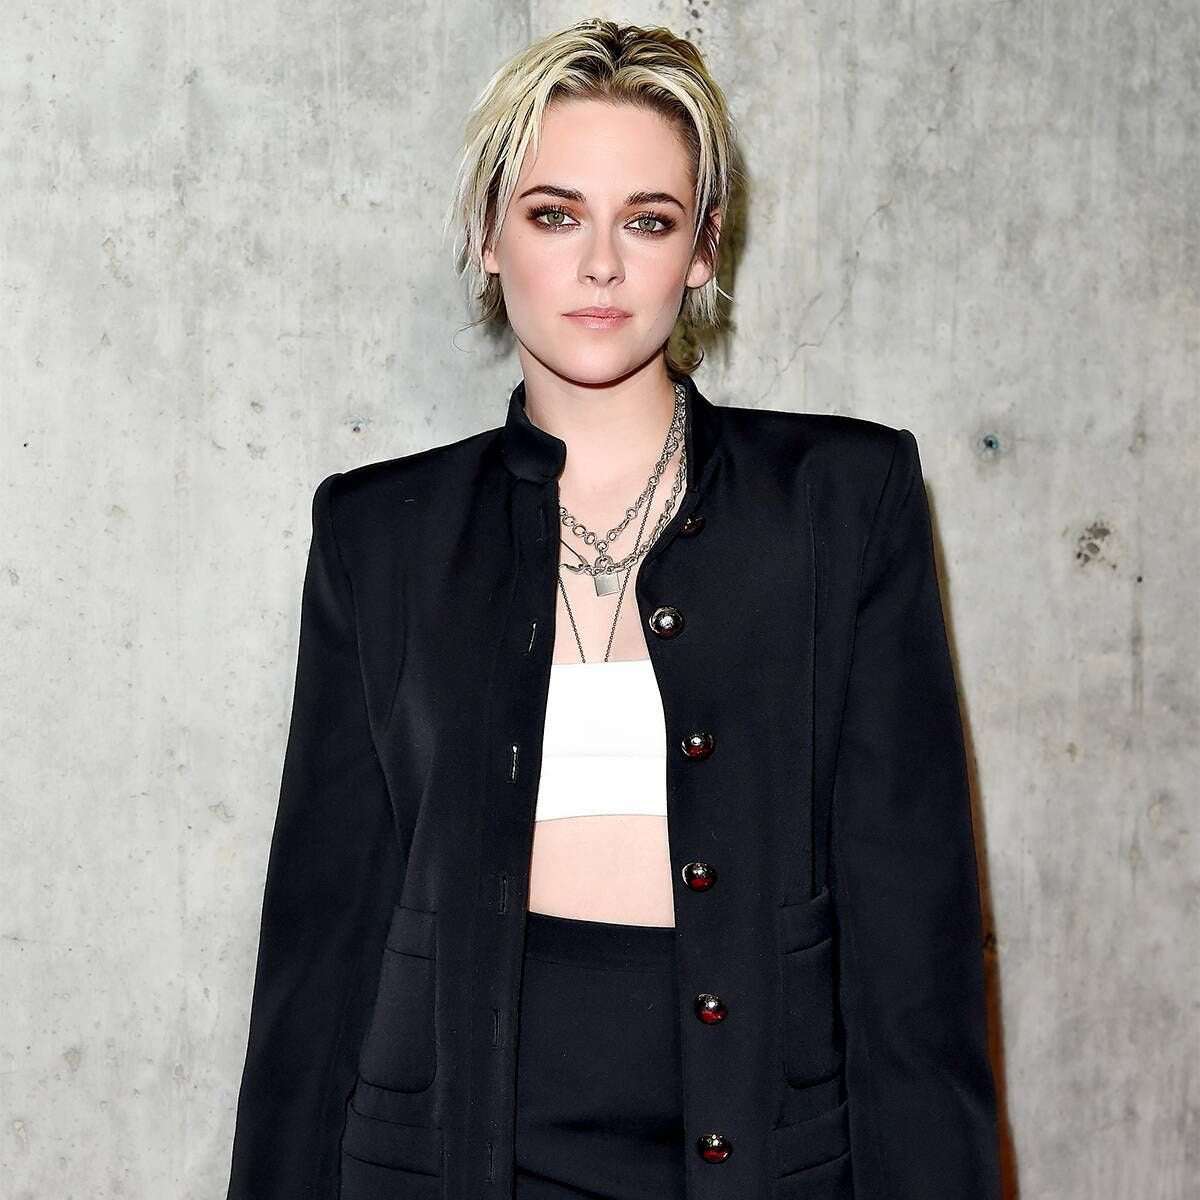 image for Kristen Stewart Addresses the "Slippery Slope" of Only Having Gay Actors Play Gay Characters